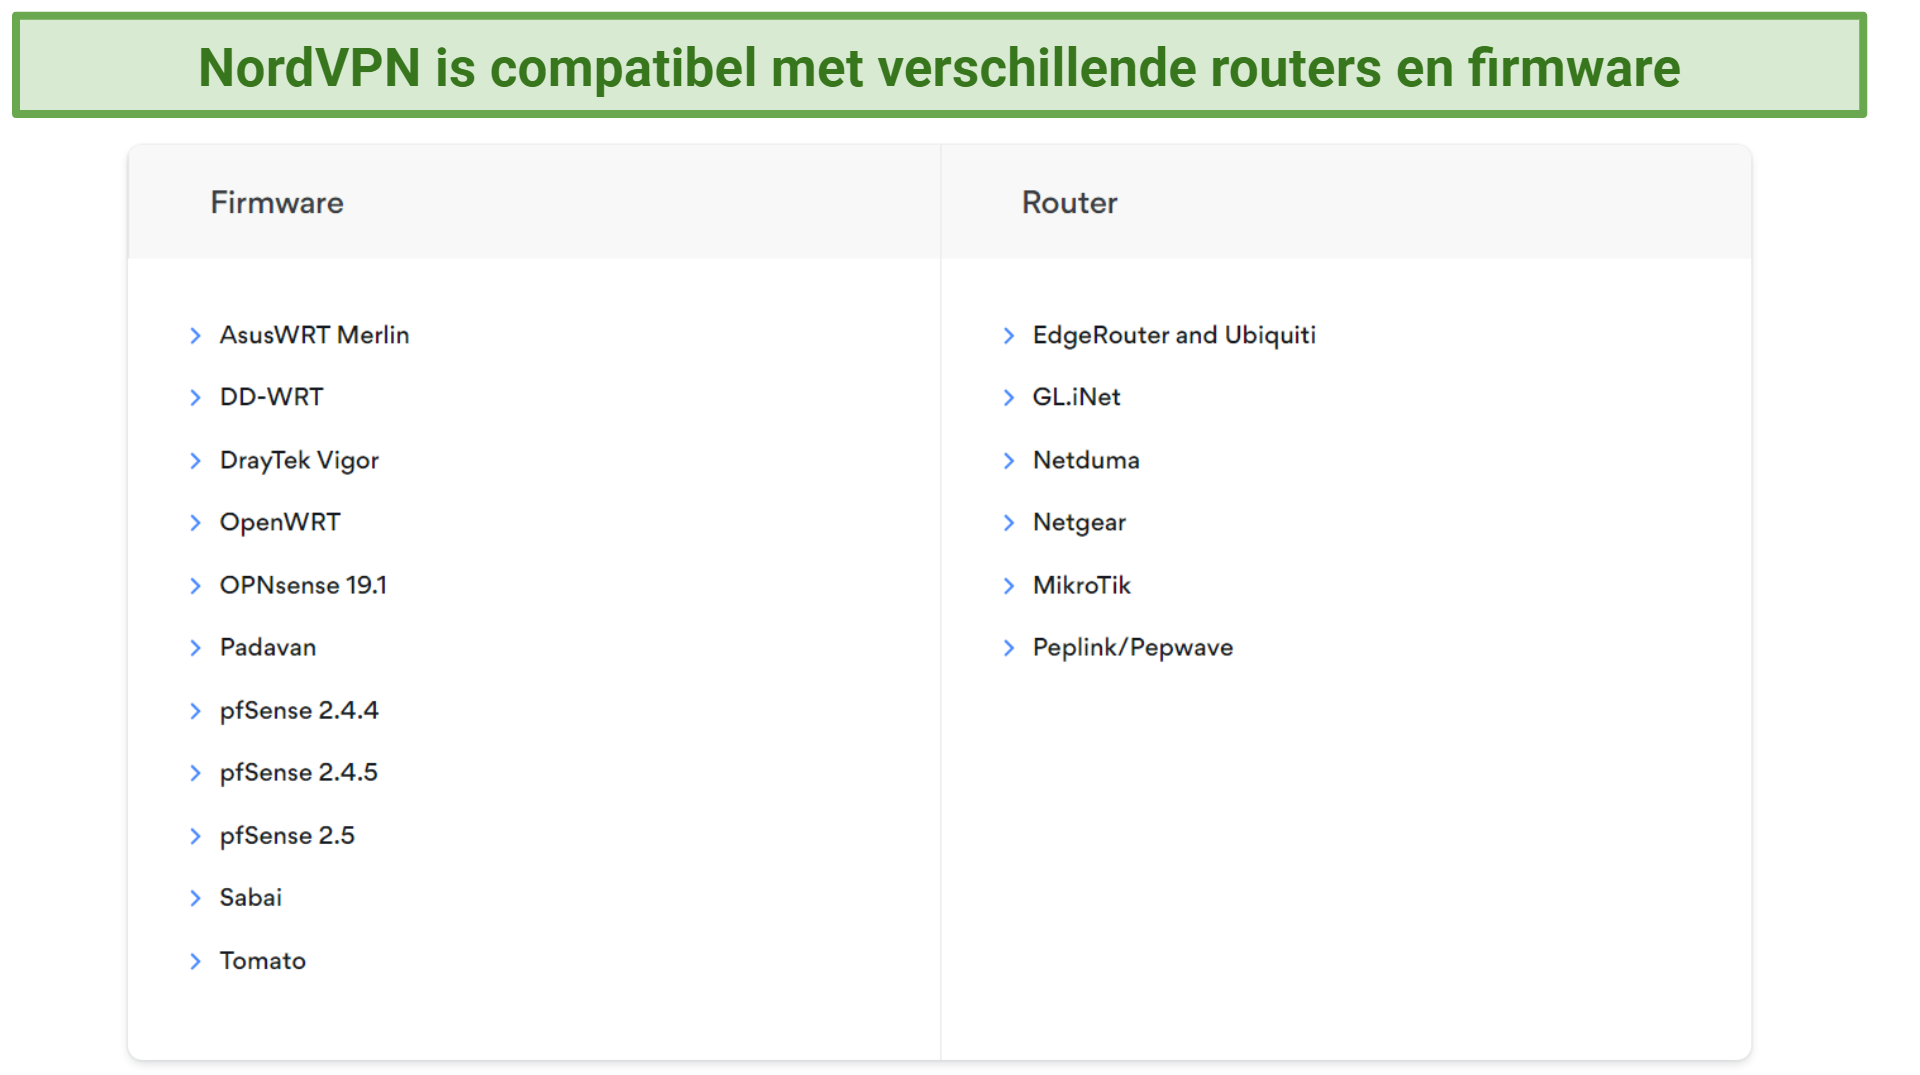 Screenshot of NordVPN website showing which routers are compatible with NordVPN